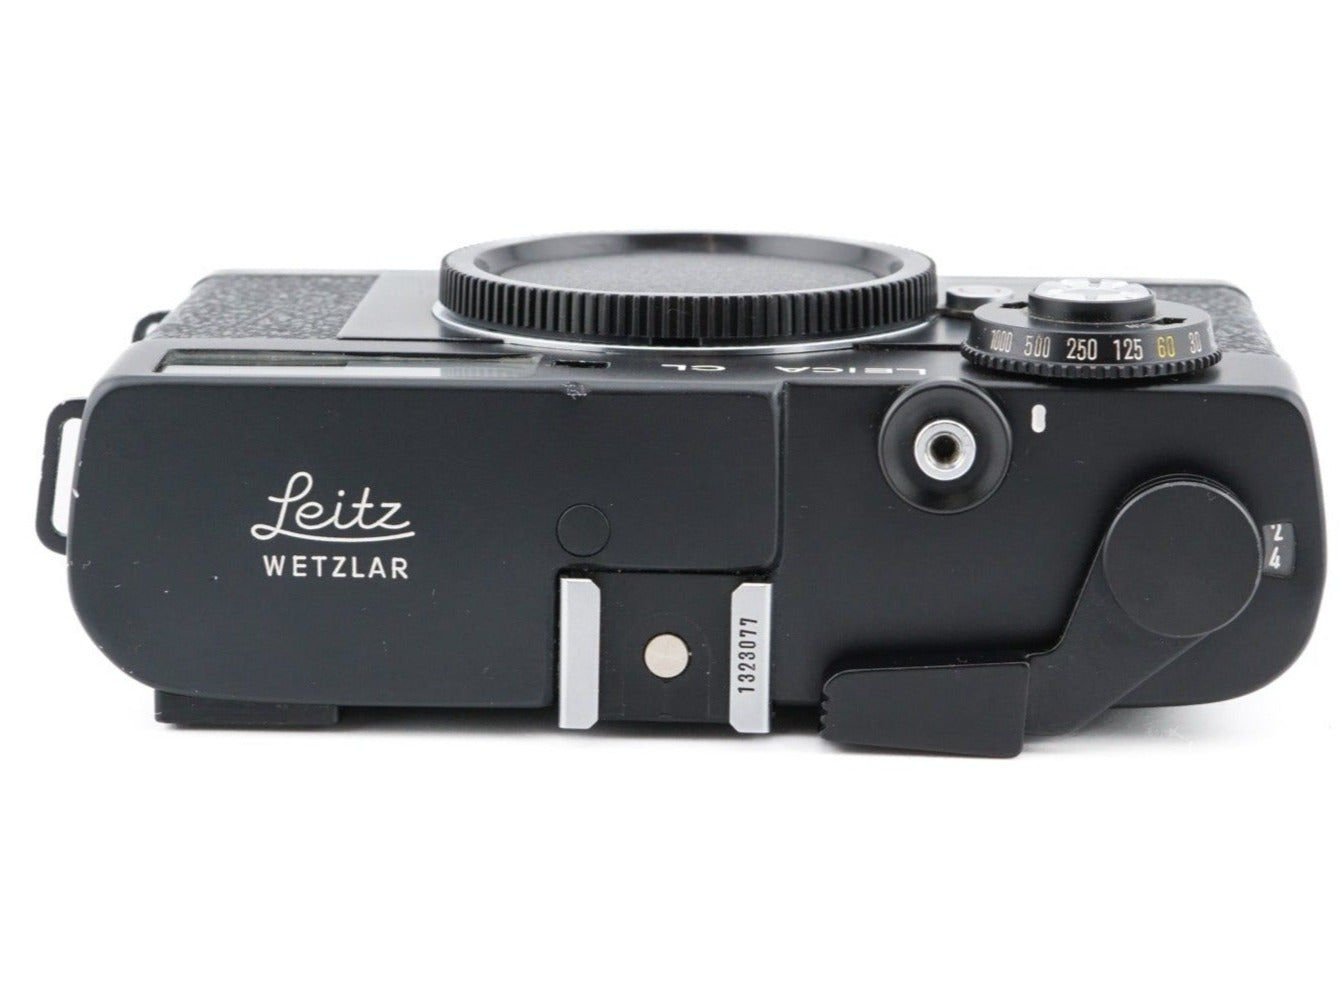 Leica CL - 35mm Film Camera body - with 6 month warranty